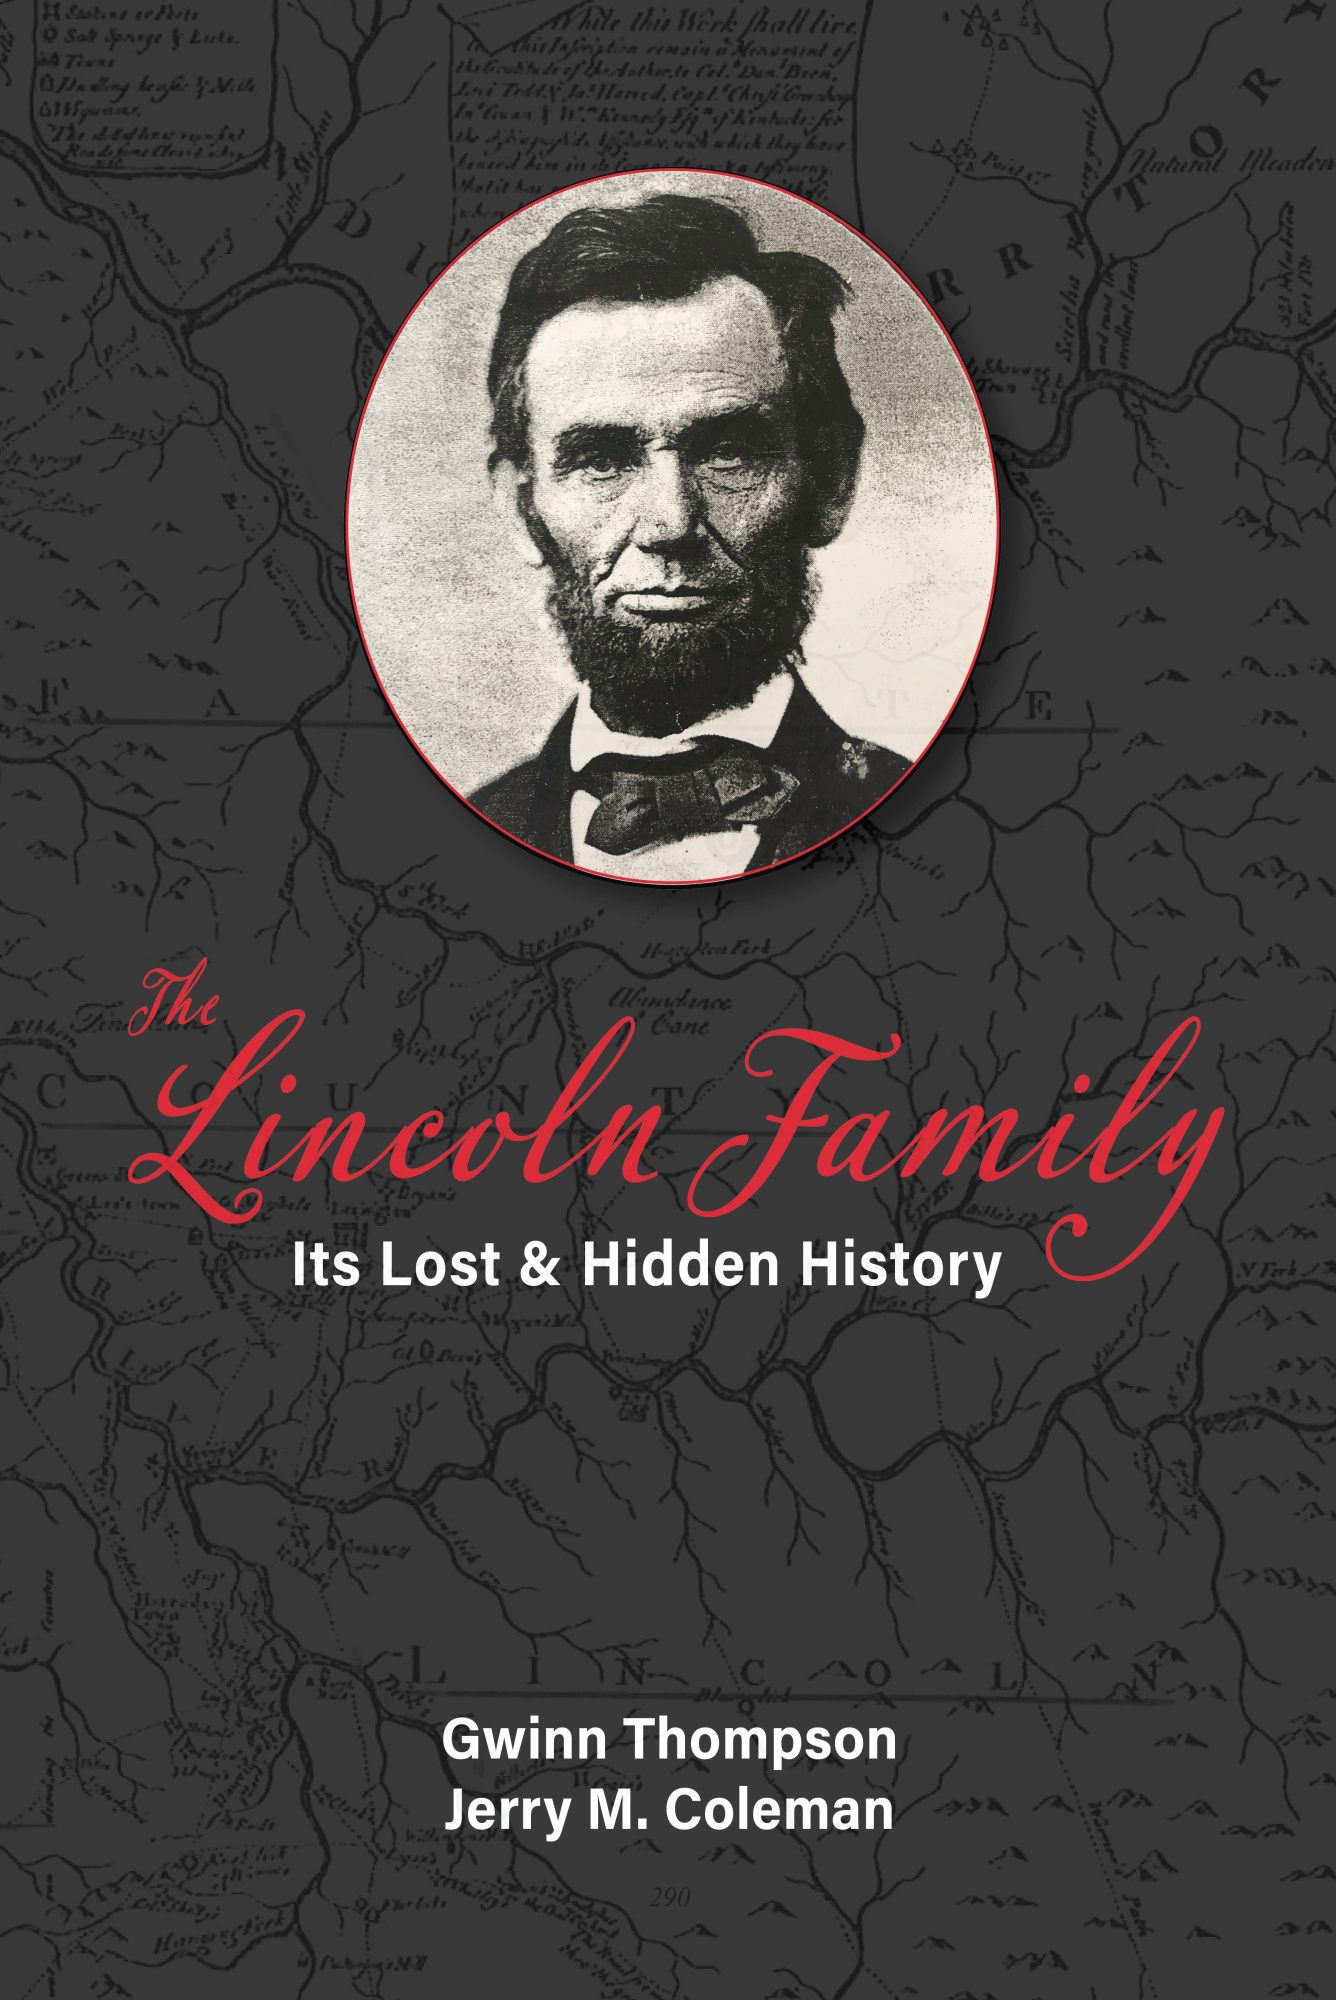 The Lincoln Family: Its Lost & Hidden History